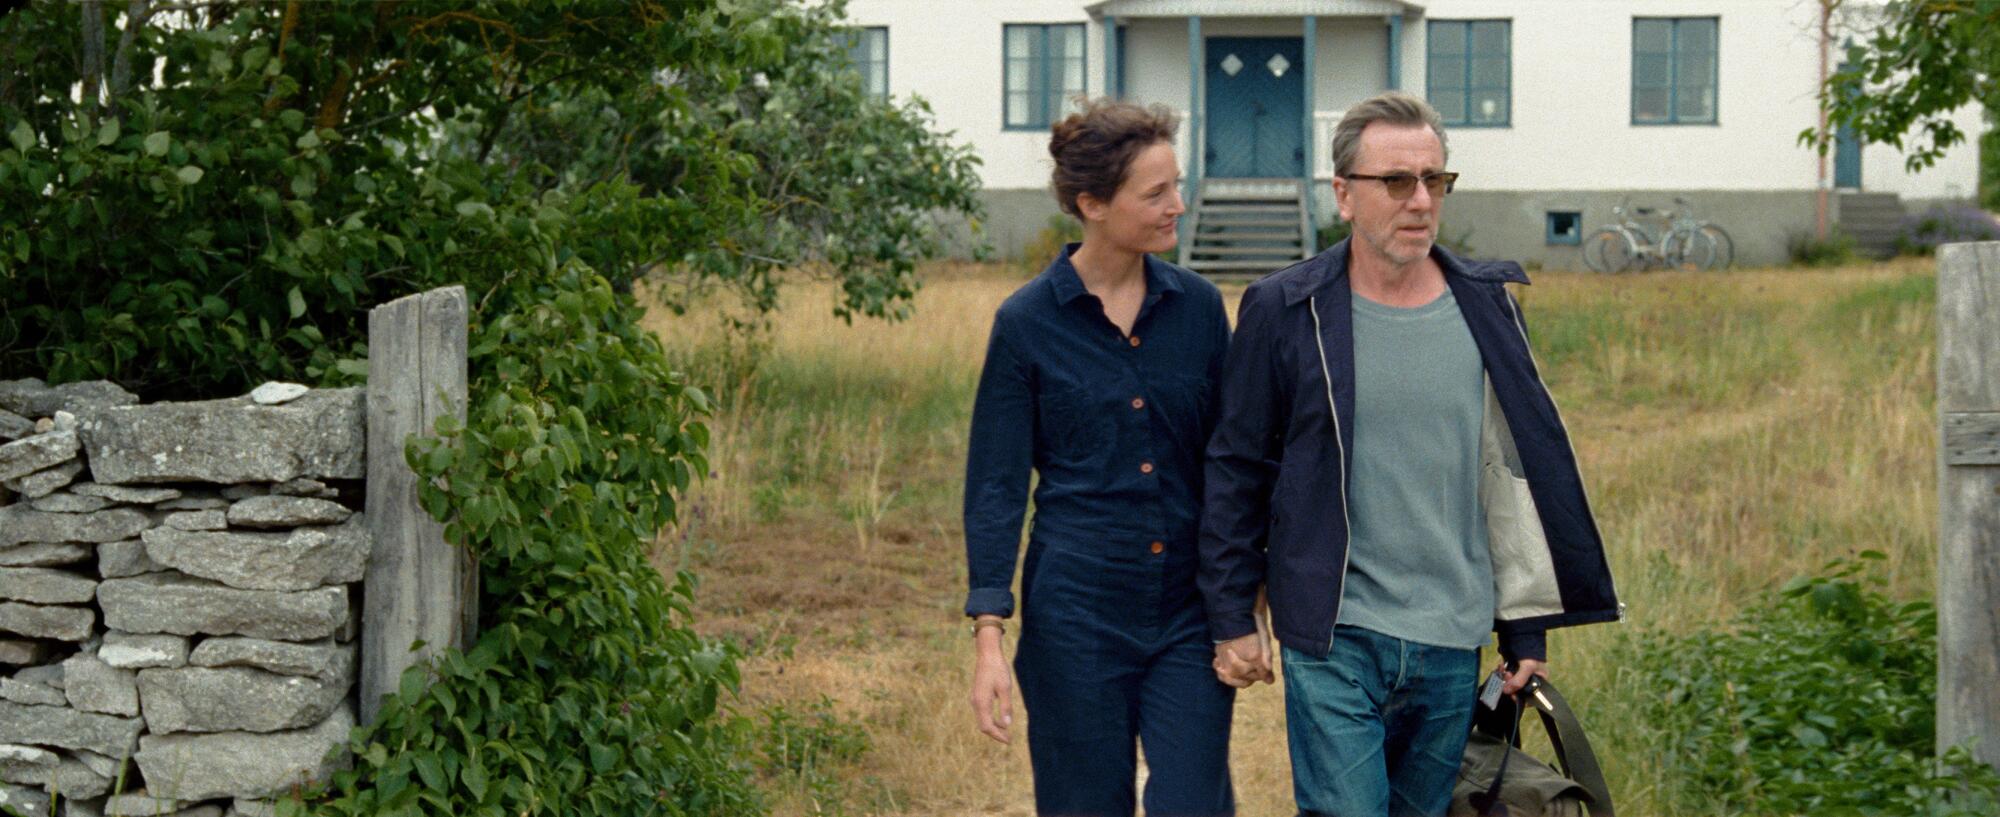 Vicky Krieps as Chris and Tim Roth as Tony, filmmakers and lovers on the verge of collapse in “Bergman Island.”